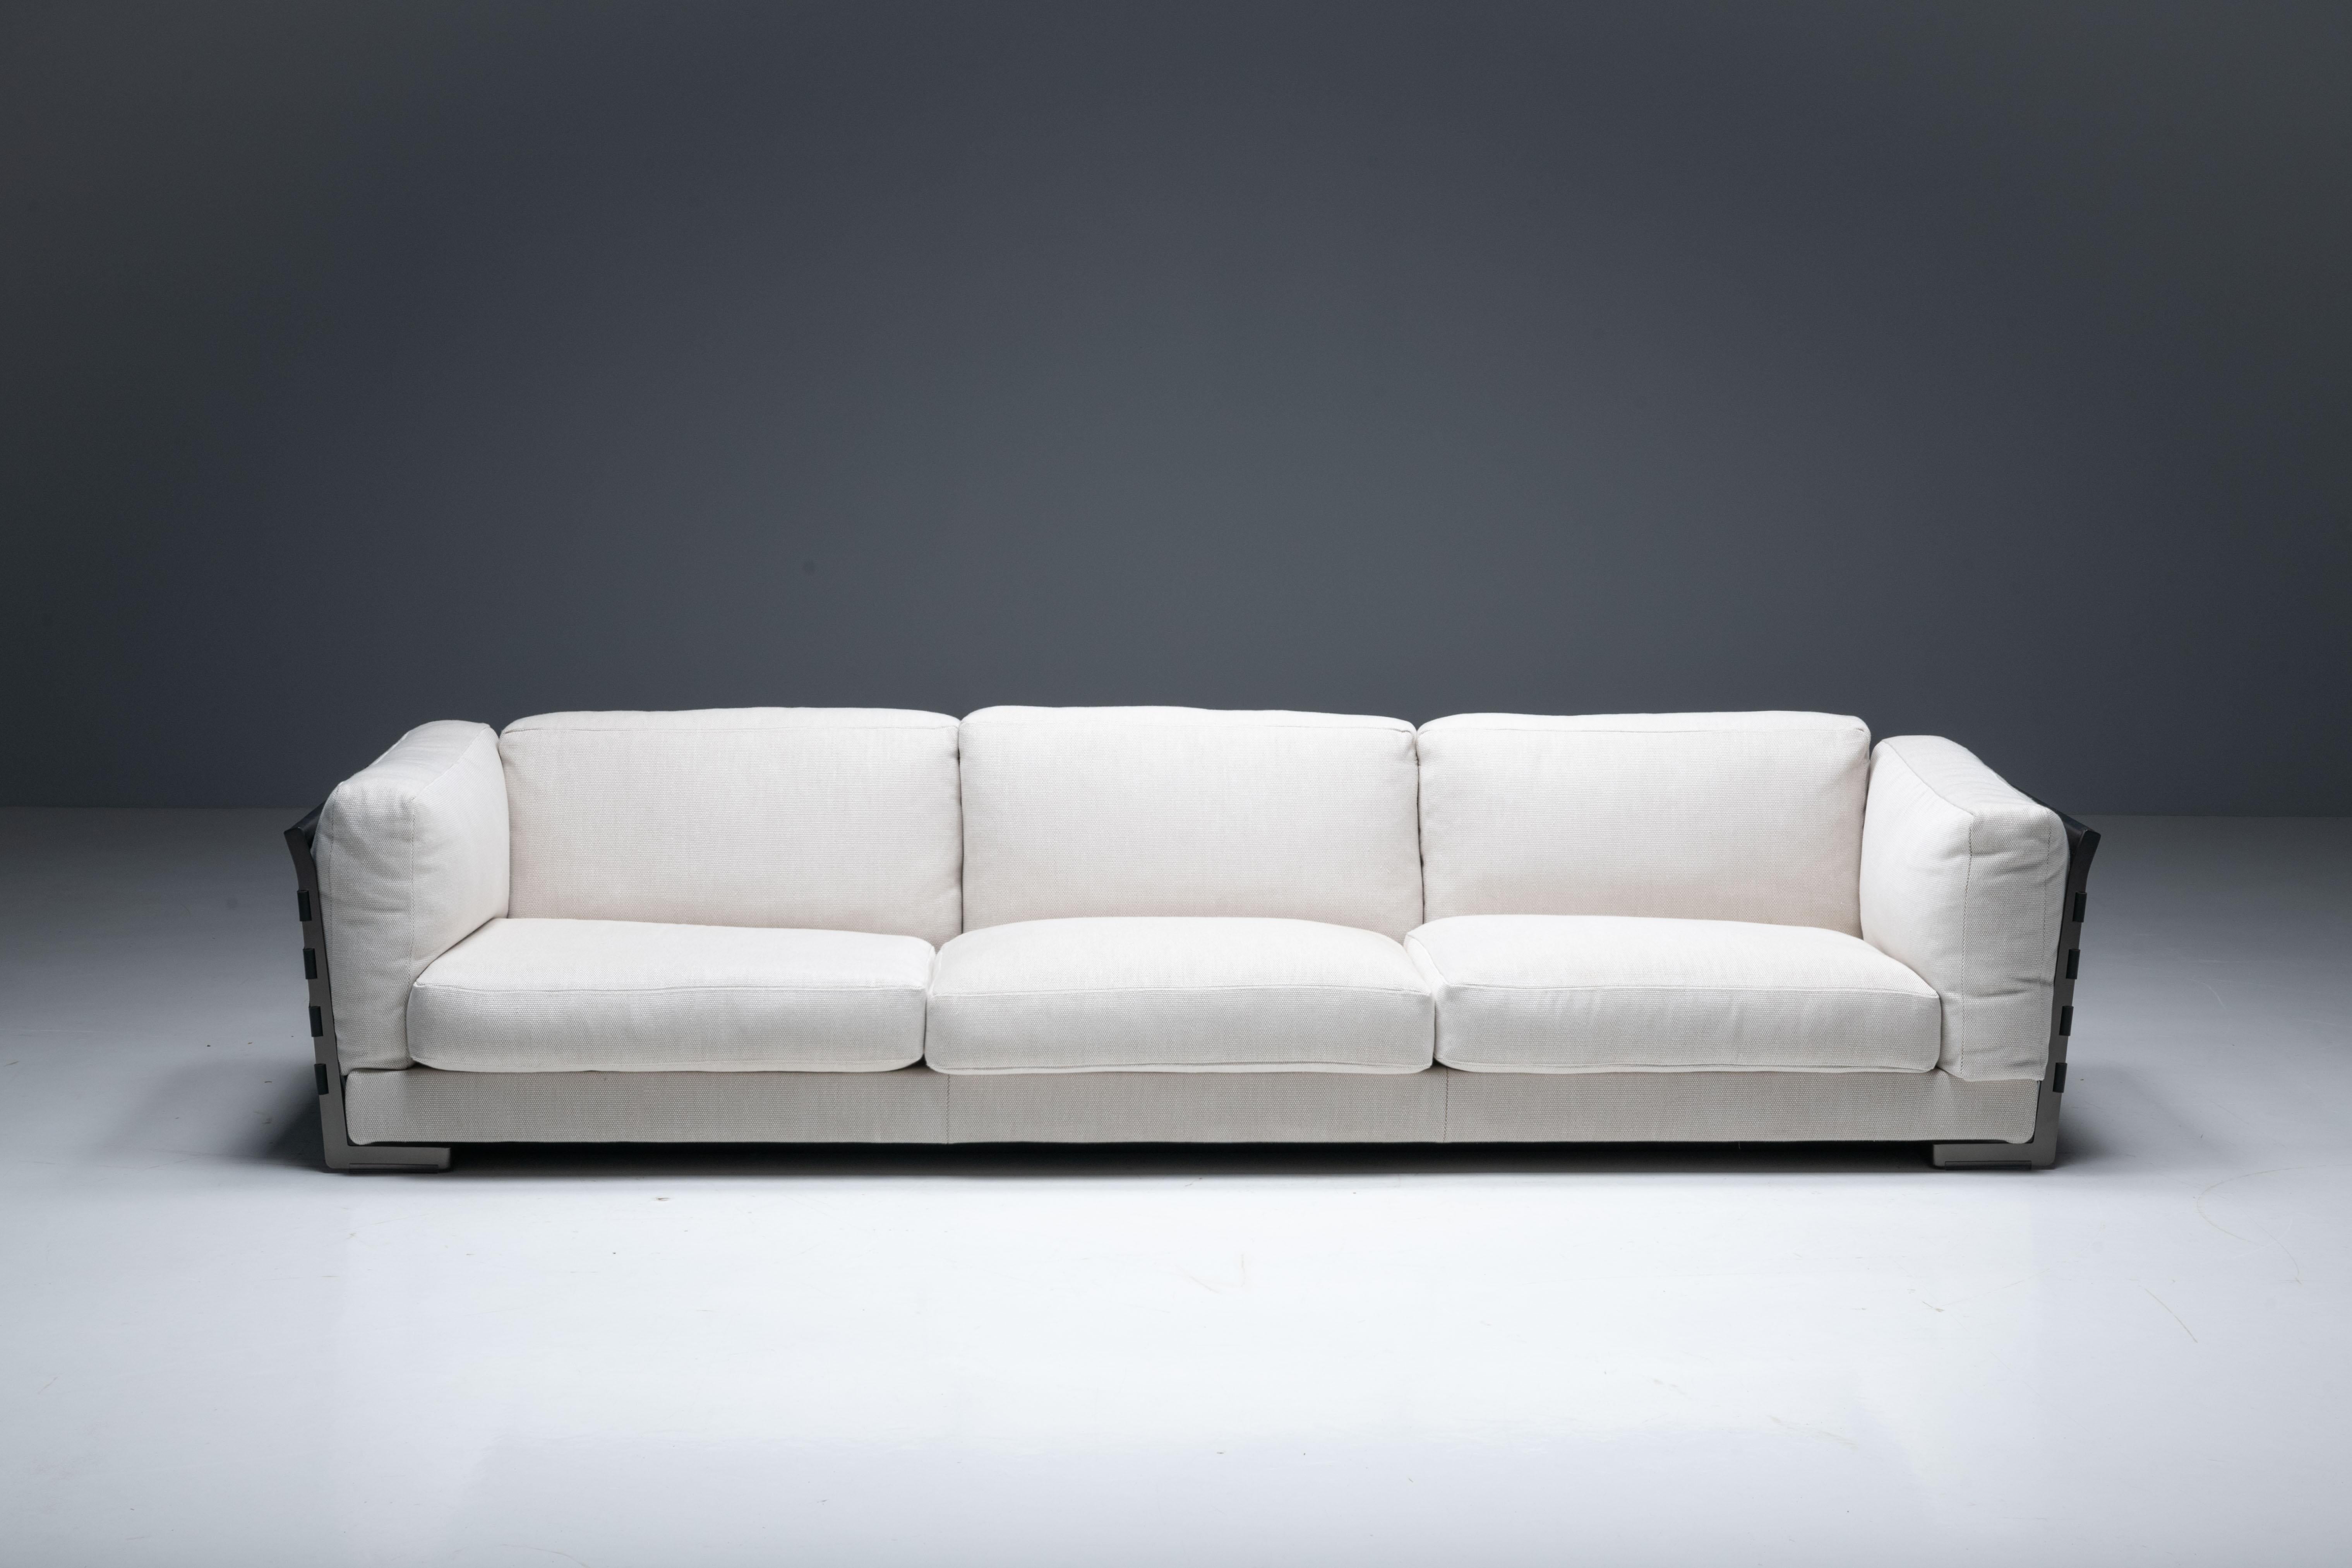 Cestone three-seater sofa designed in 2008 by Antonio Citterio for Flexform, an embodiment of authentic Italian craftsmanship. This showroom model, designed to command attention and take center stage in your living space, redefines the boundaries of